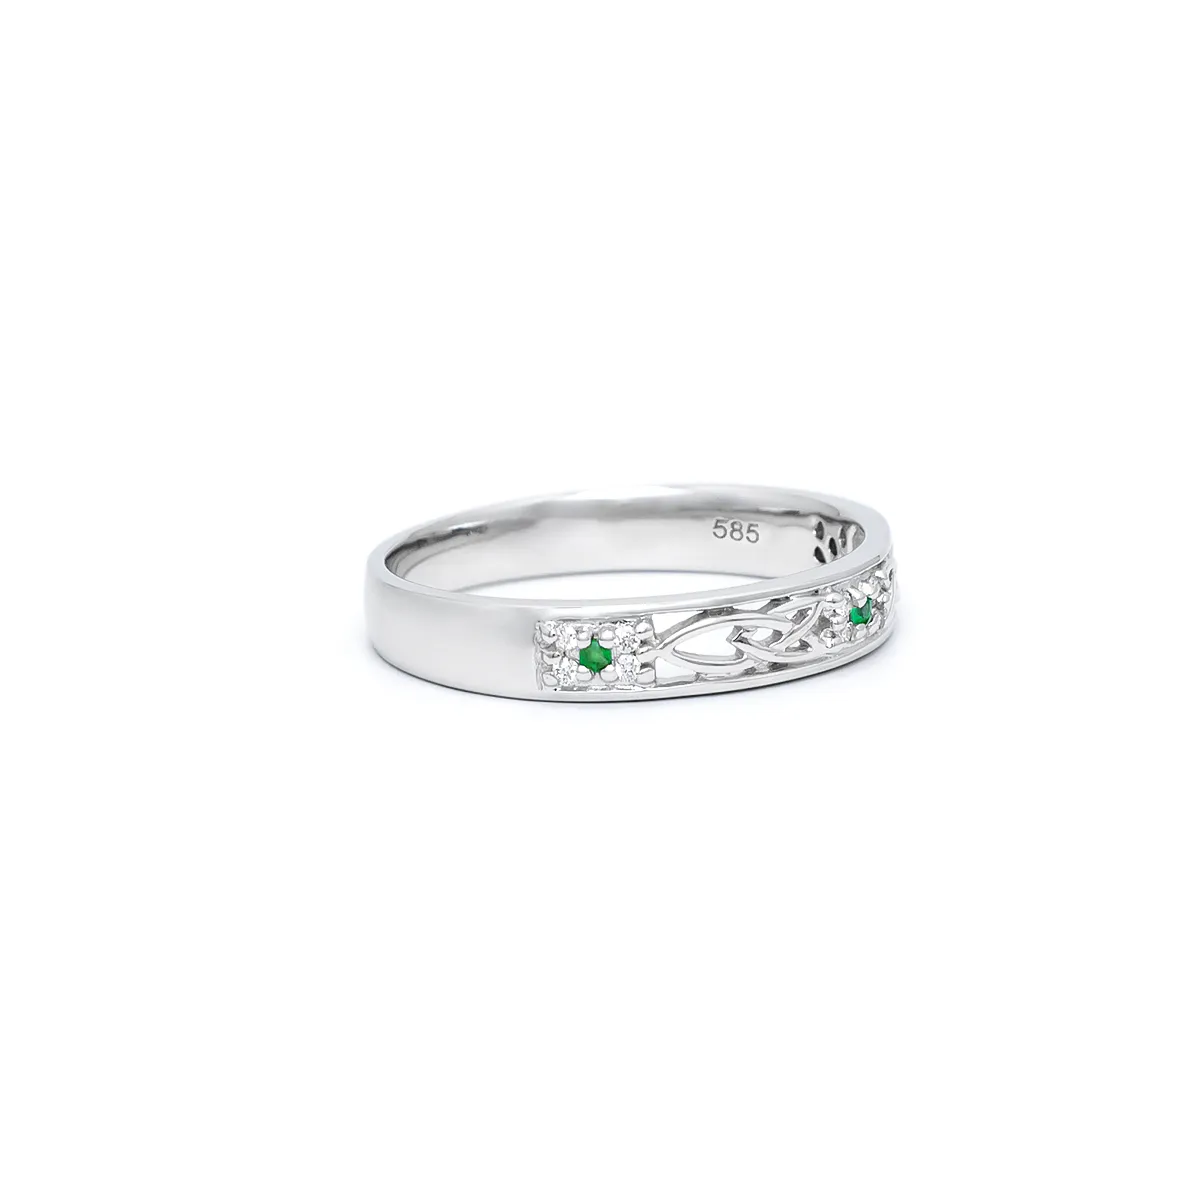 IJC00012 Celtic Ring With Emerald 03